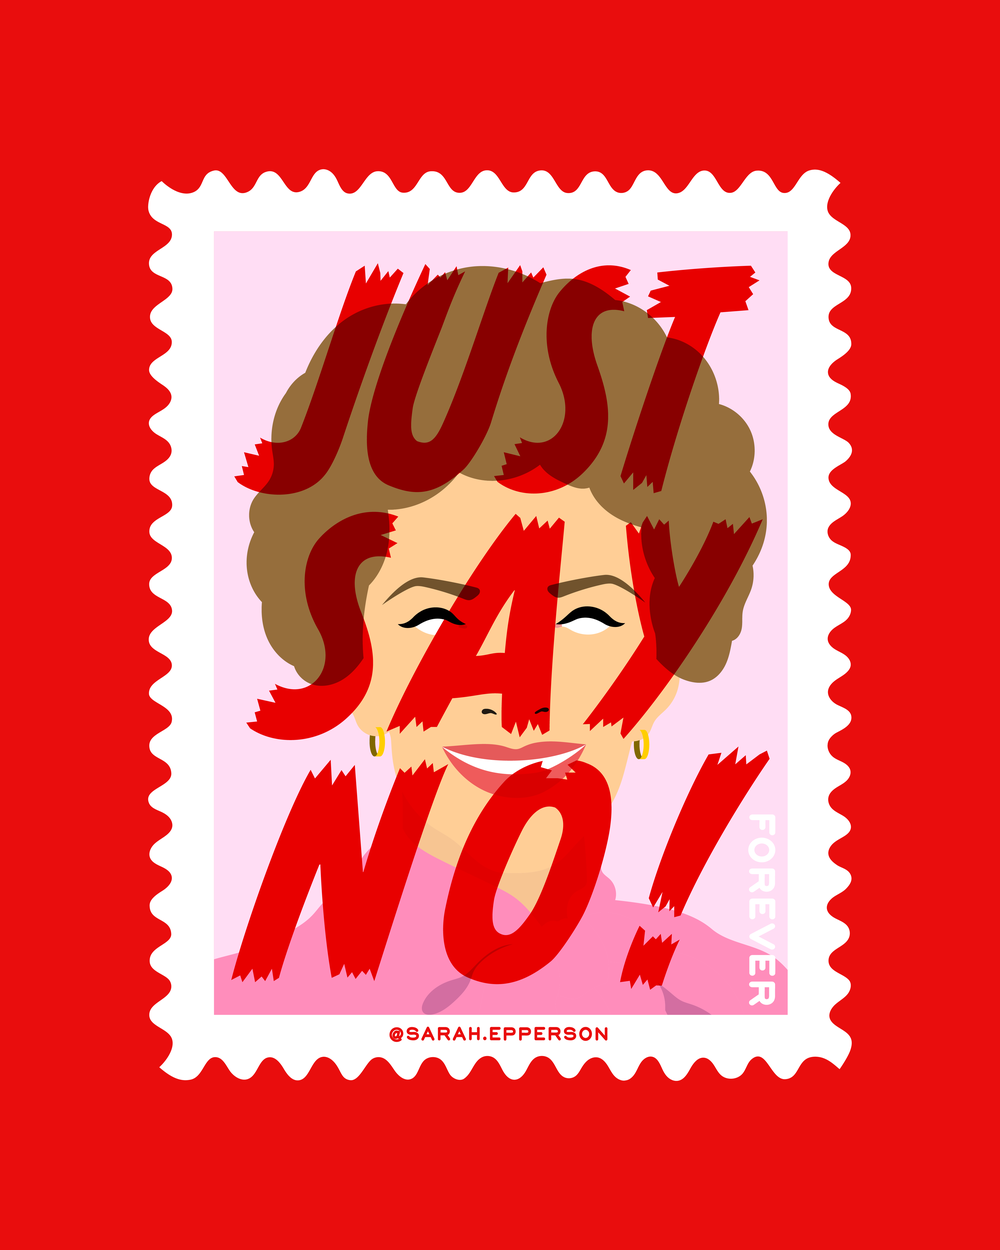 The illustration that artist Sarah Epperson created in response to the unveiling of the Nancy Reagan commemorative Forever stamp.